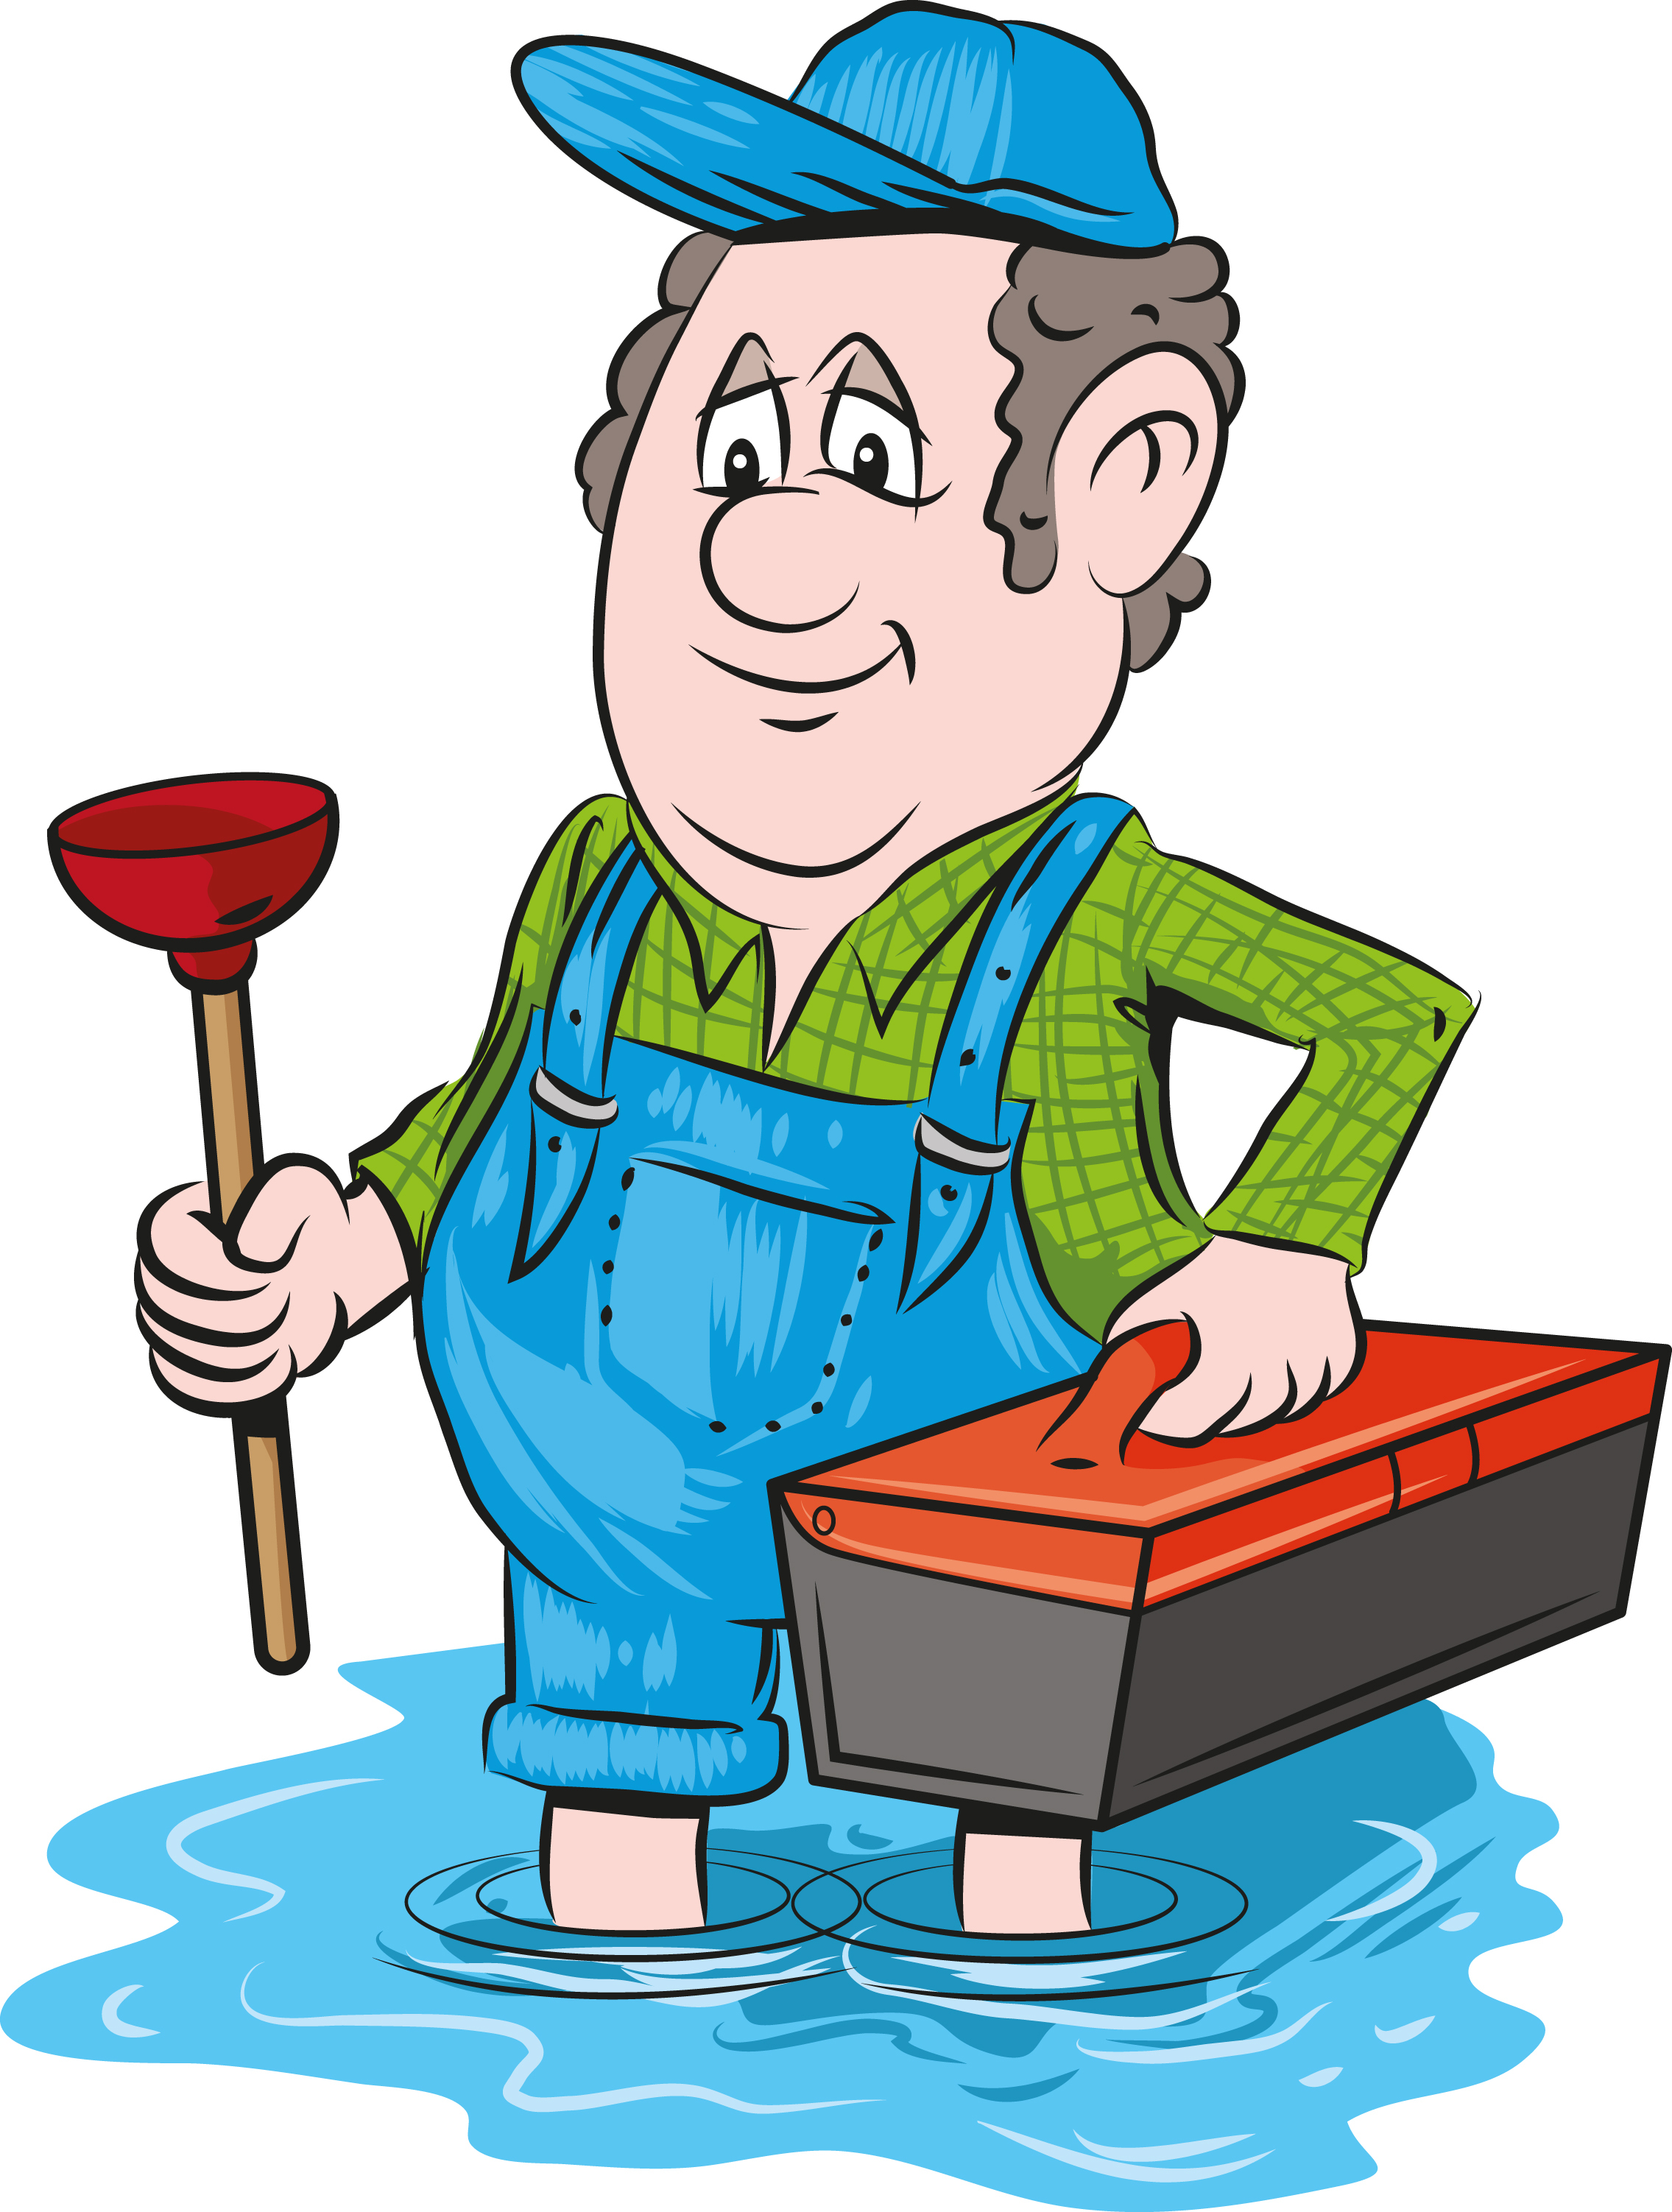 Plumbers teach bookkeepers about business | Bookkeepers Hub